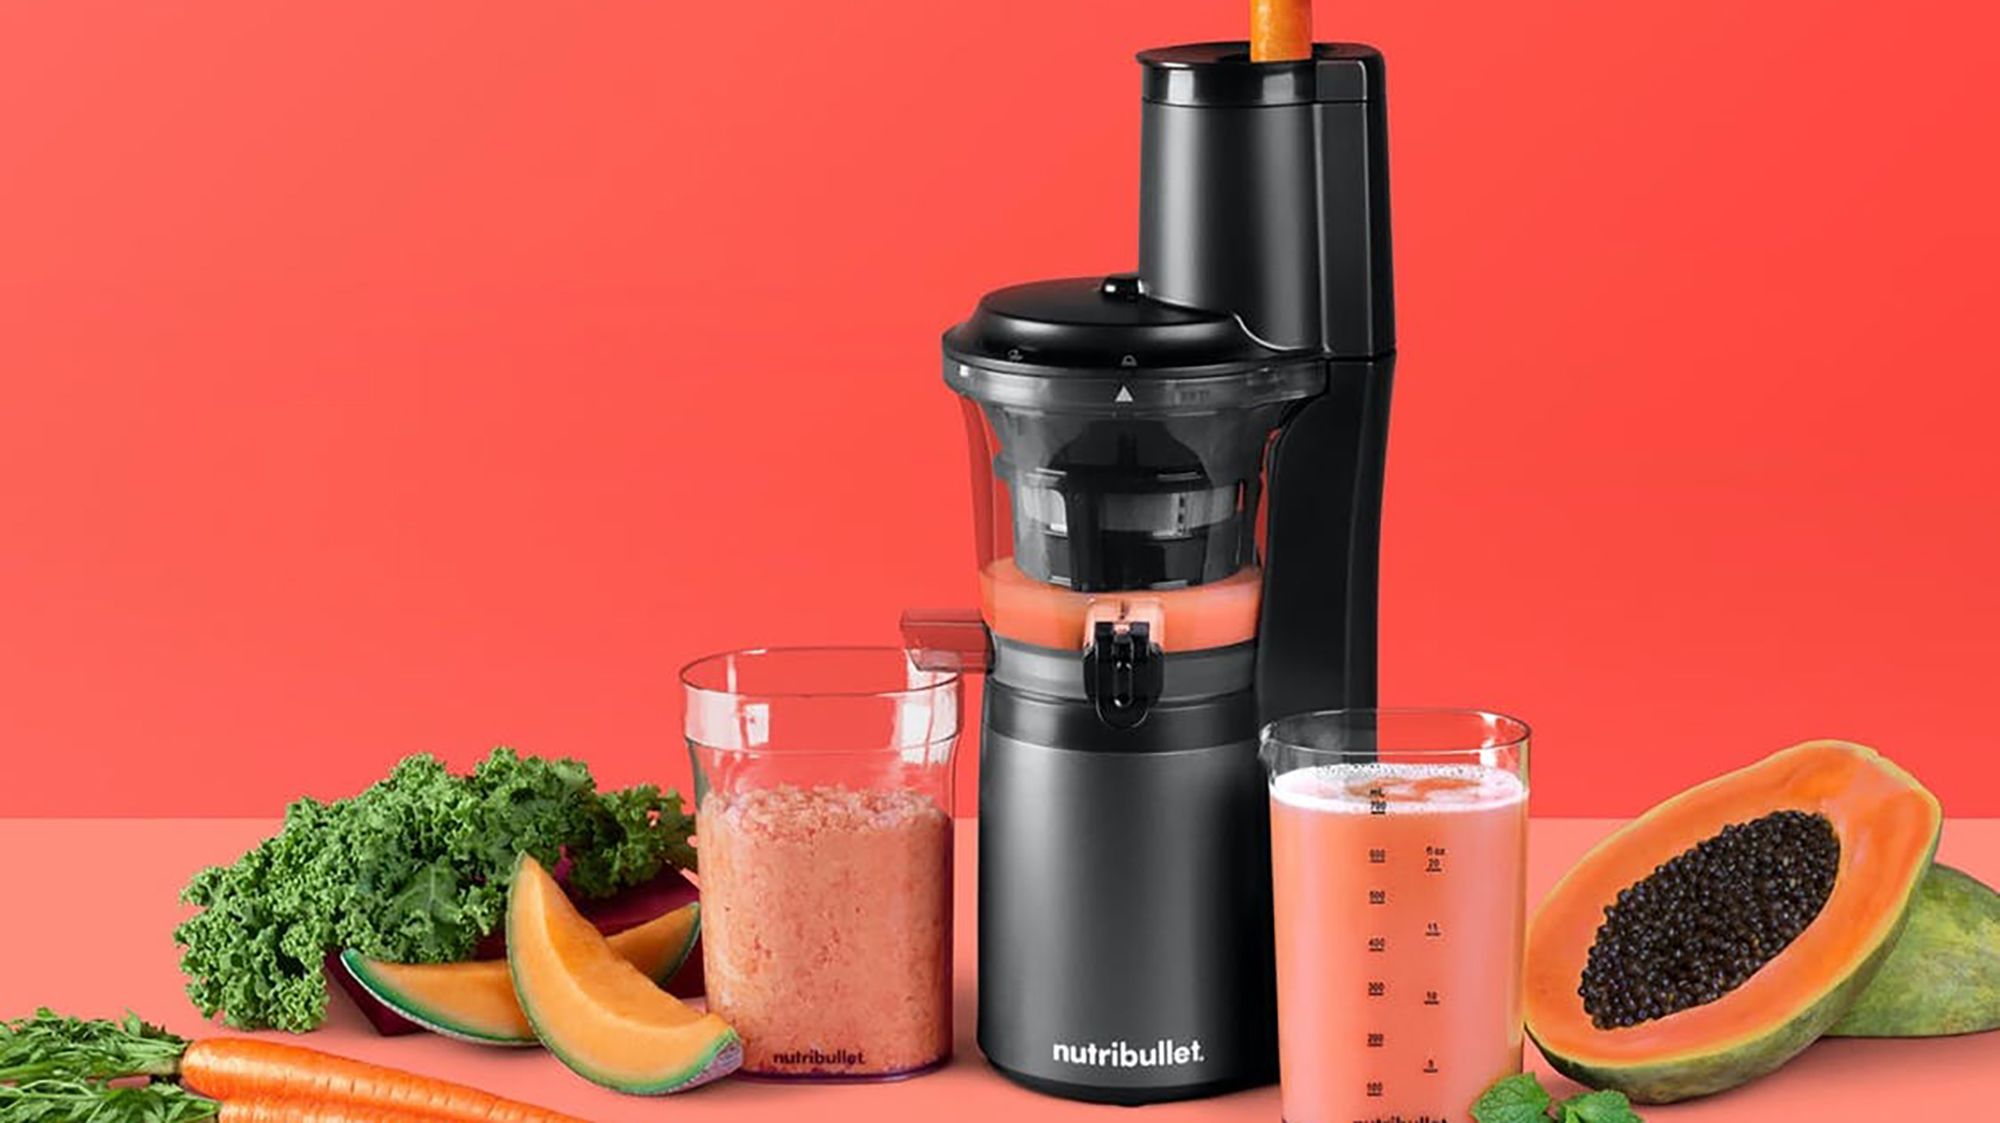 Cold season is upon us and there's no better time to prep some  immune-boosting juices with your nutribullet Slow Juicer!…